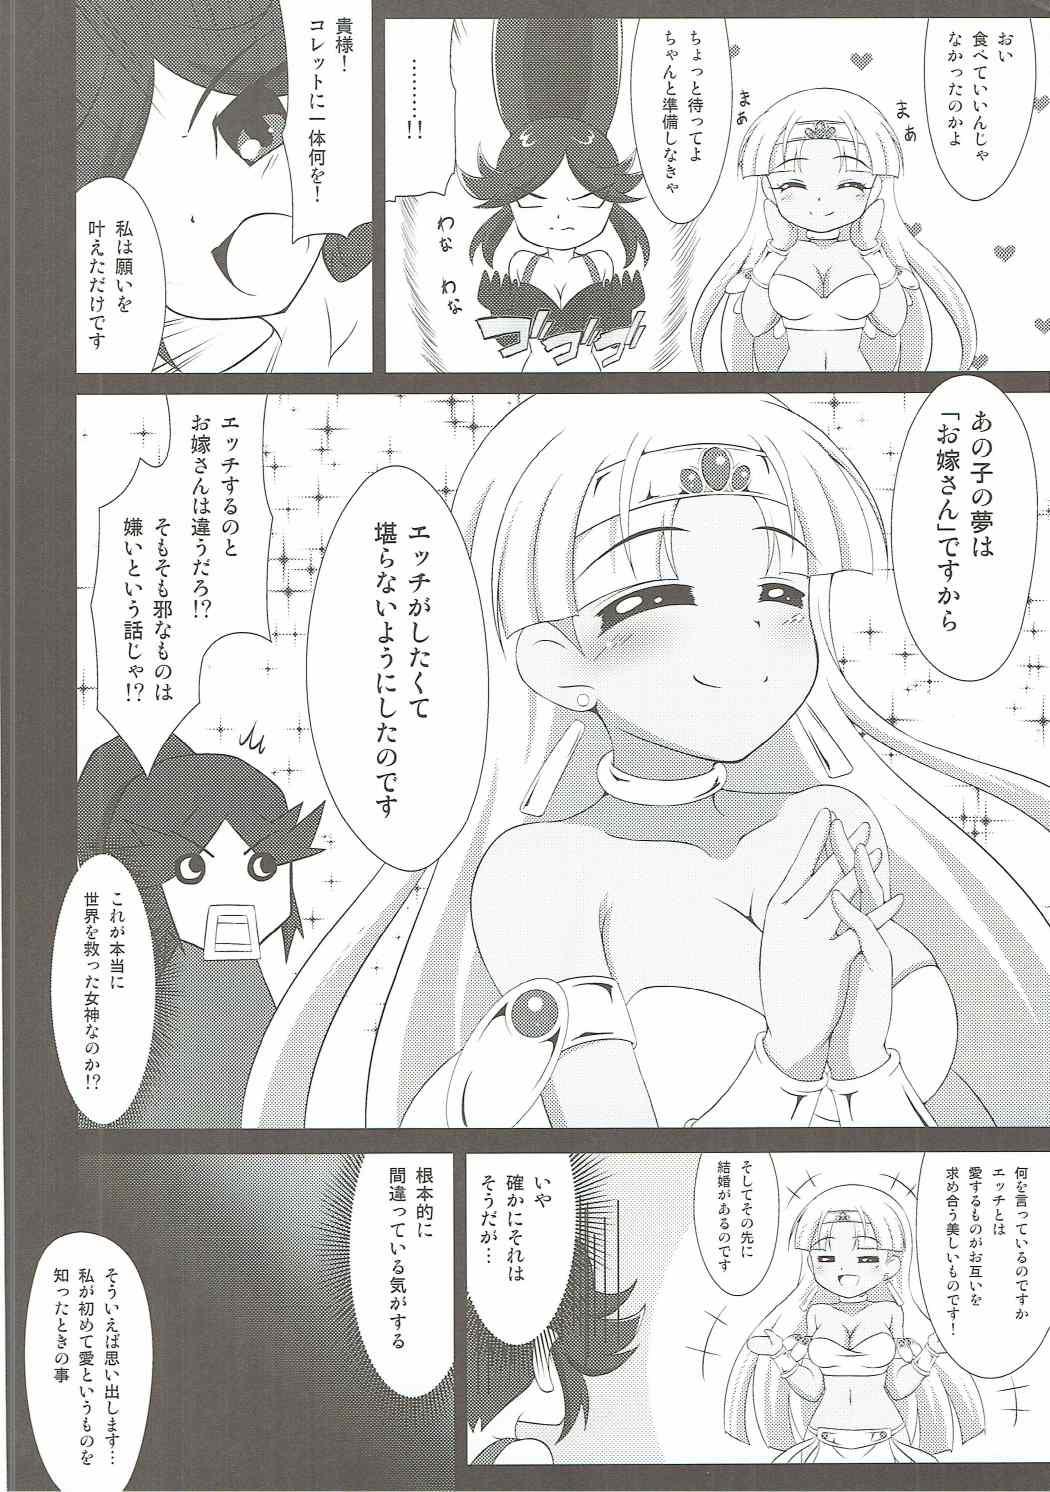 Sesso Claire to Hihou no Tobira - Hihouden Dyke - Page 9